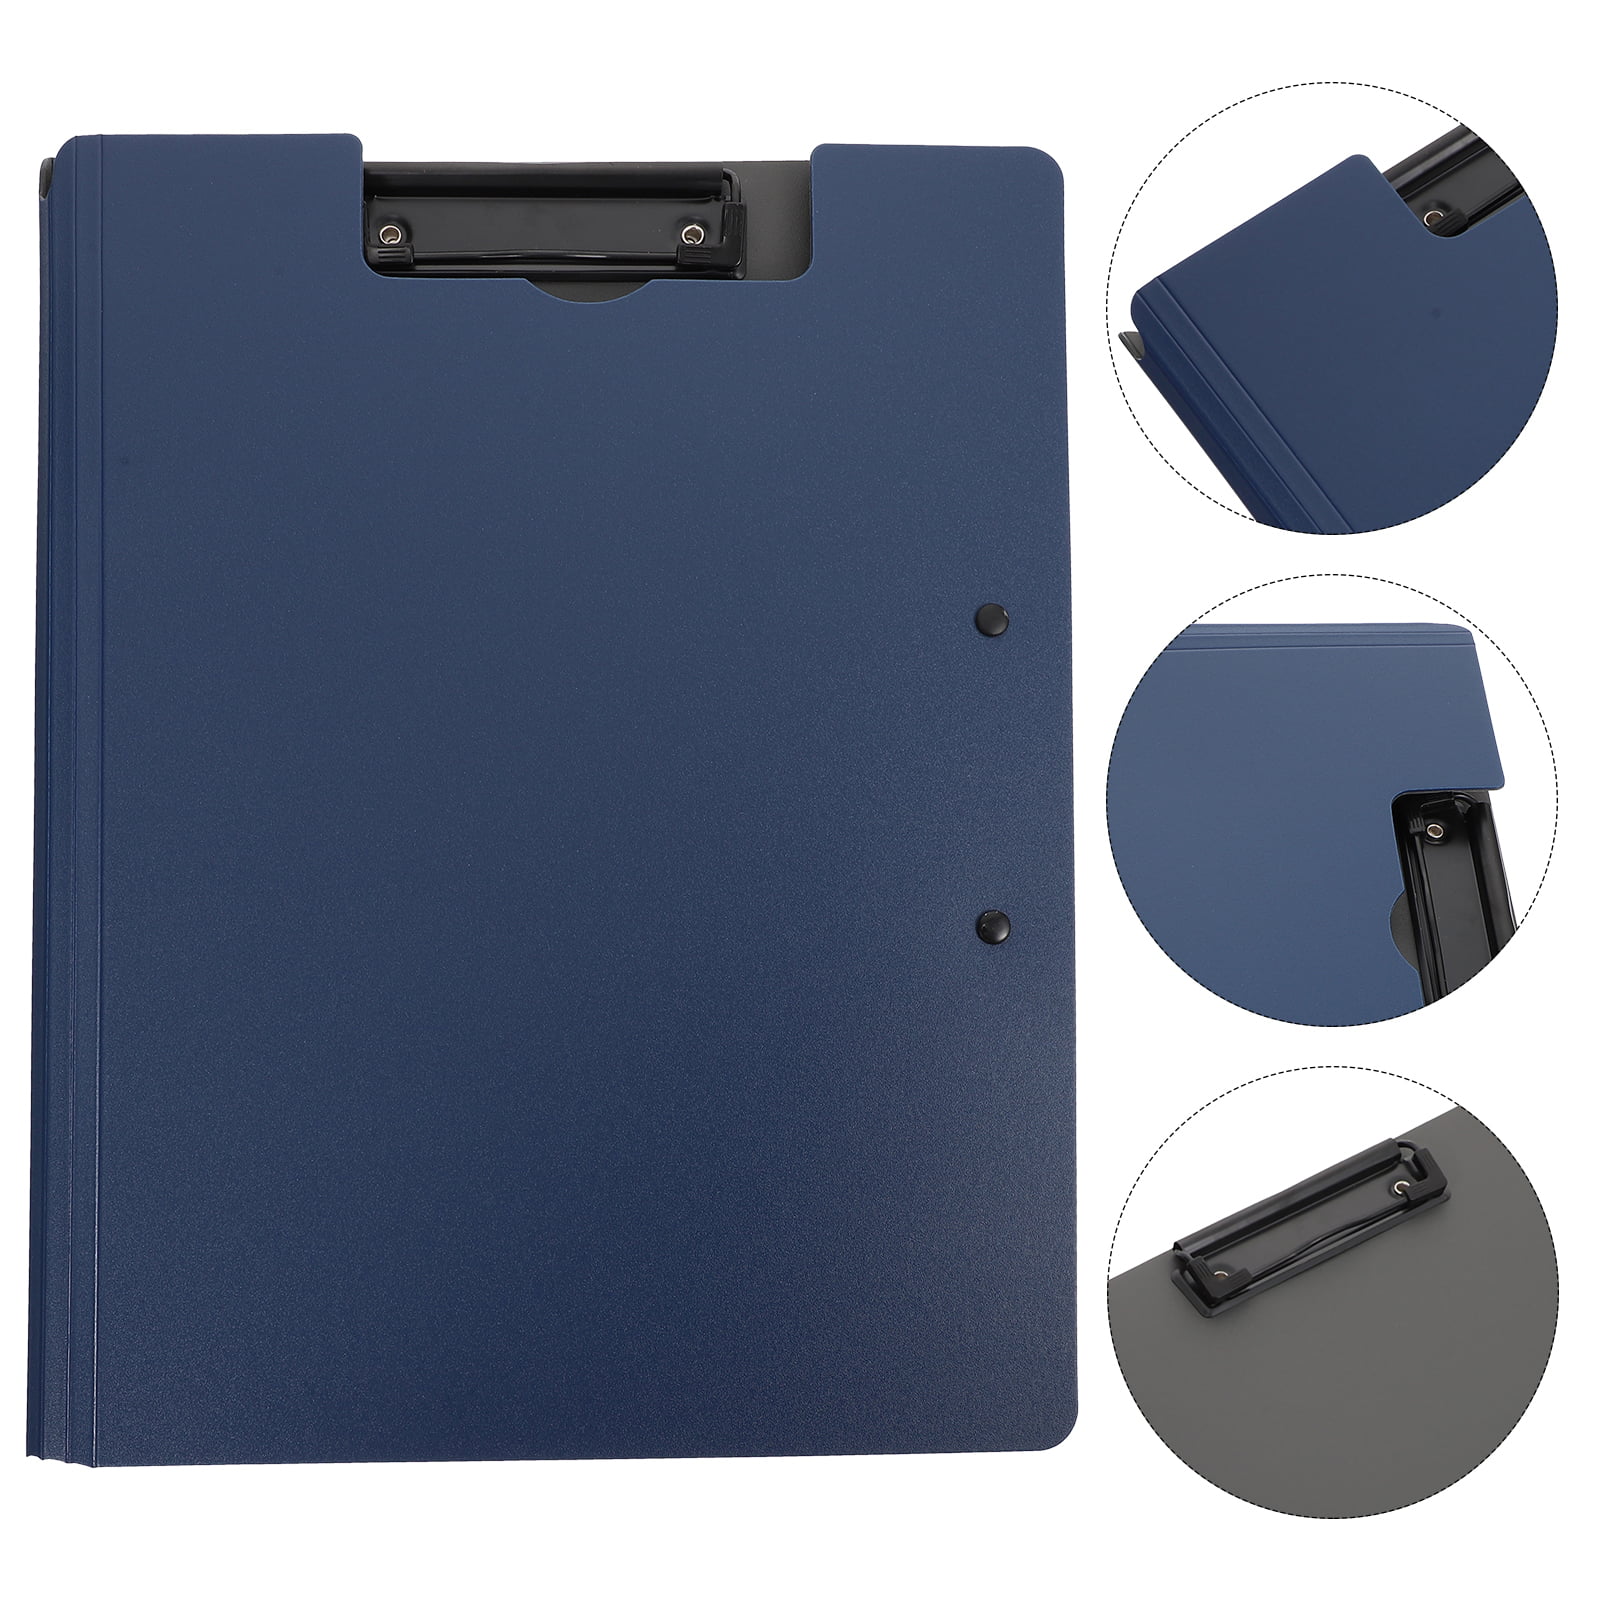  Harloon 9 Pieces Clipboard with Storage Plastic Storage  Clipboard Nursing Clipboard Foldable Clip Boards Storage with Metal Clip,  9.5 x 13.5 Inch (Black) : Office Products